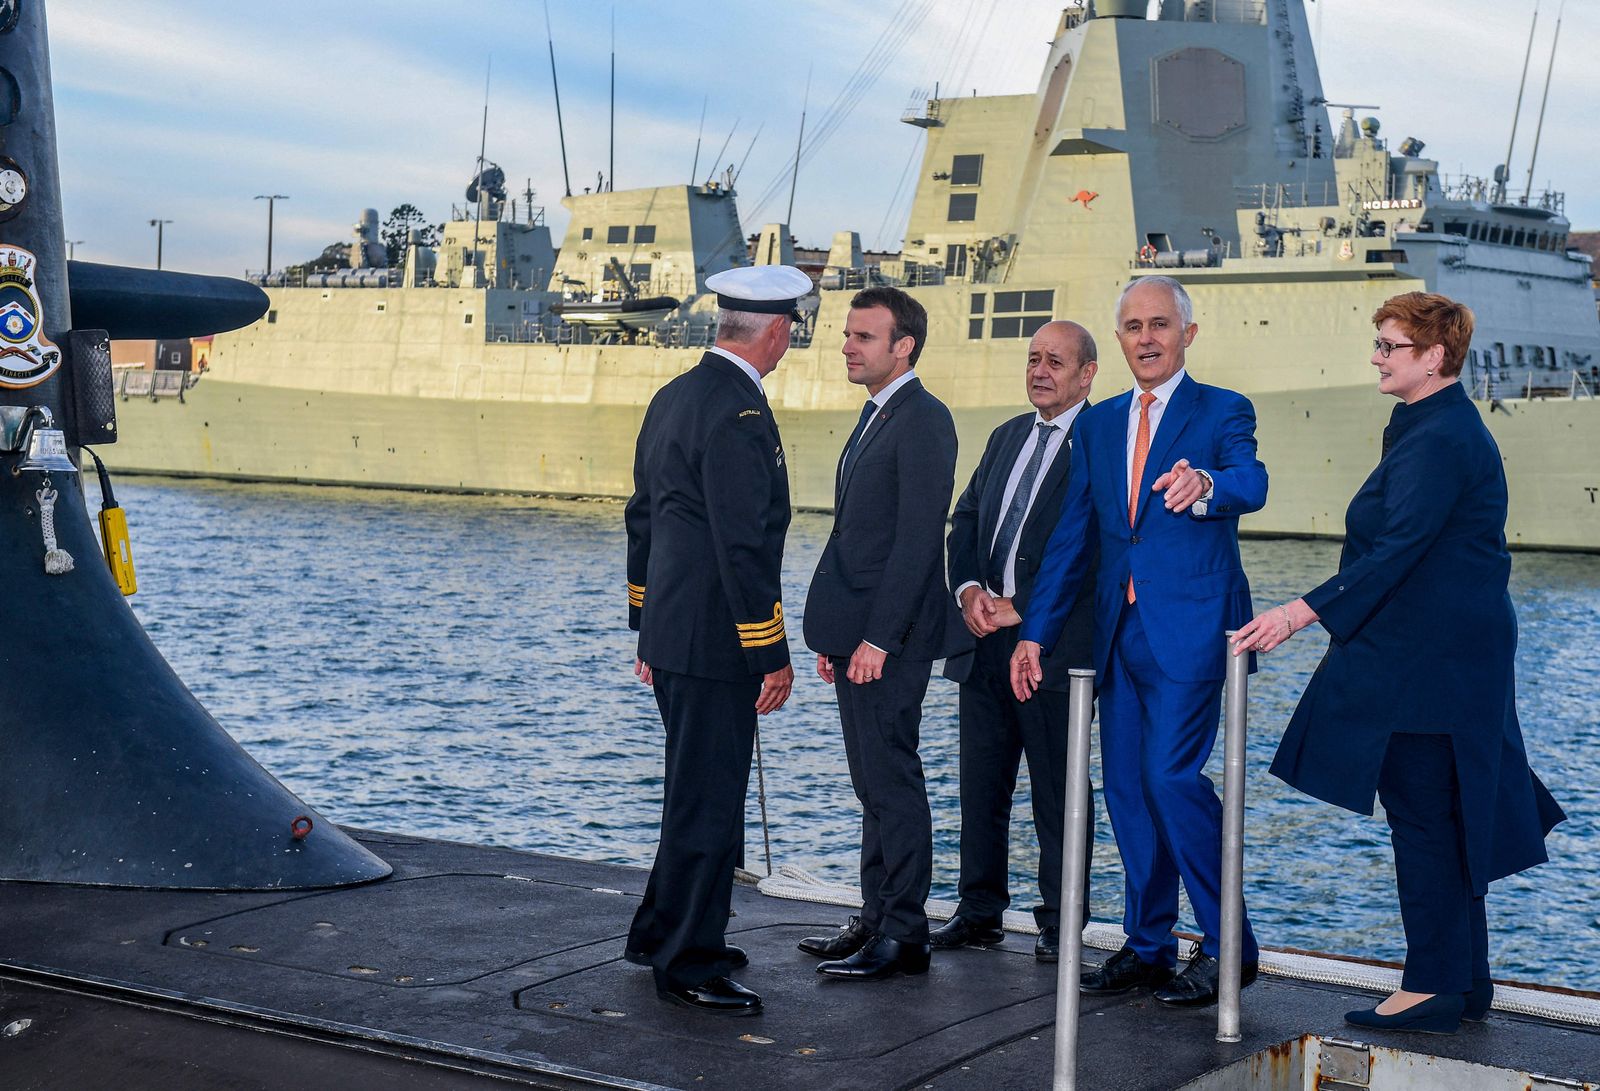 (FILES) A file photo taken on May 2, 2018 shows French President Emmanuel Macron (2/L) and Australian Prime Minister Malcolm Turnbull (2/R) standing on the deck of HMAS Waller, a Collins-class submarine operated by the Royal Australian Navy, at Garden Island in Sydney. - Australia is expected to scrapped a 66 billion USD deal for France to build submarines, replacing it with nuclear-powered subs using US and British technology. (Photo by BRENDAN ESPOSITO / POOL / AFP) - AFP